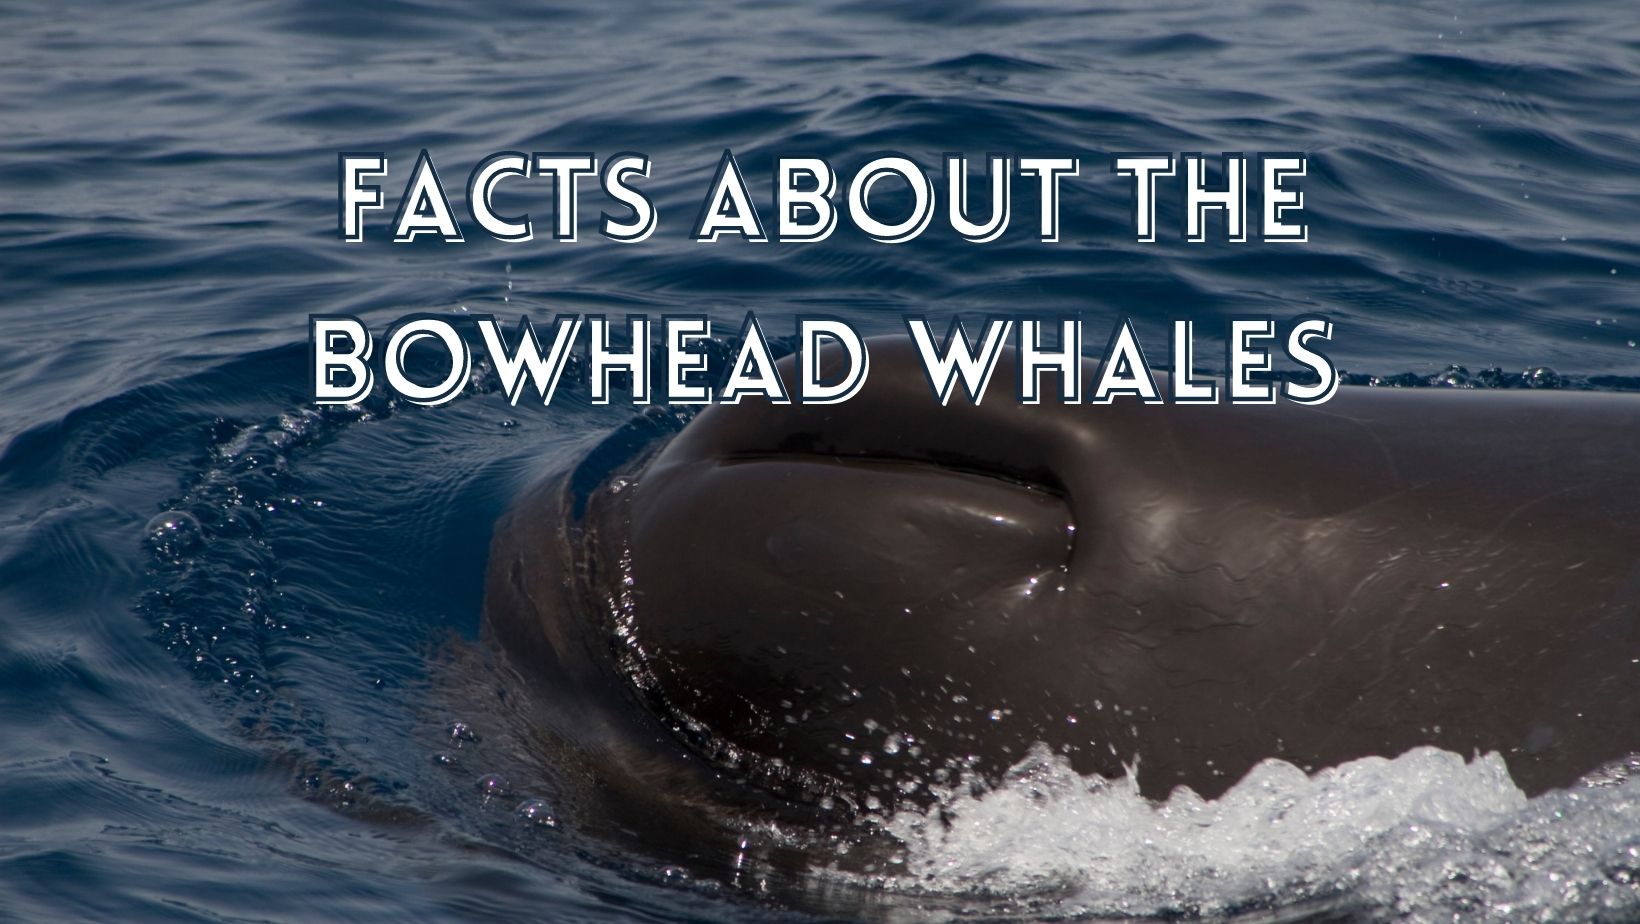 Facts about bowhead whales